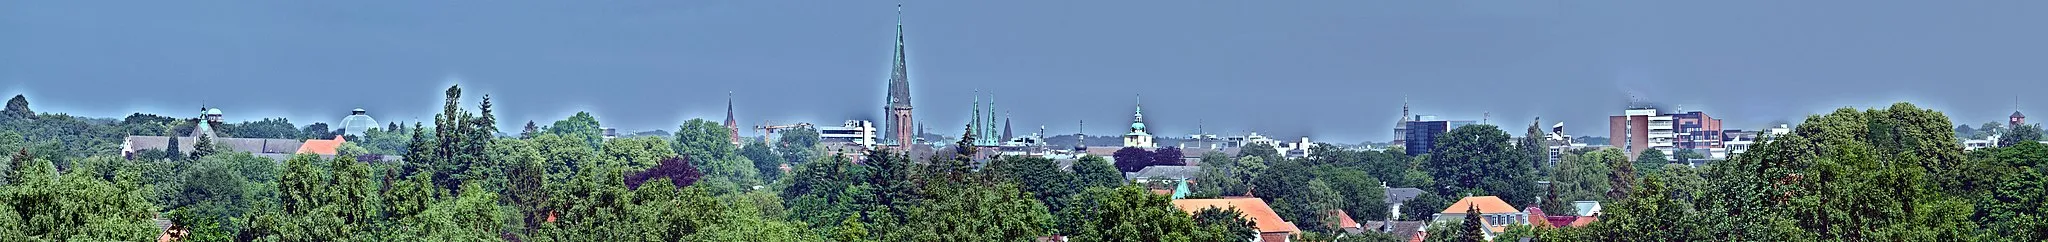 Photo showing: Downtown Oldenburg, viewed from the "Osternburger Utkiek" park: On the left, the roof of the district court [Amtsgericht] as well as the water tower "Alte Fleiwa" (a former meat processing plant) and the cupola the State Theater [Staatstheater] can be seen. In the middle, the towers of St Peter's Church, St Lambert's Church, and the palace are visible as well as the tower of the train station on the far right.